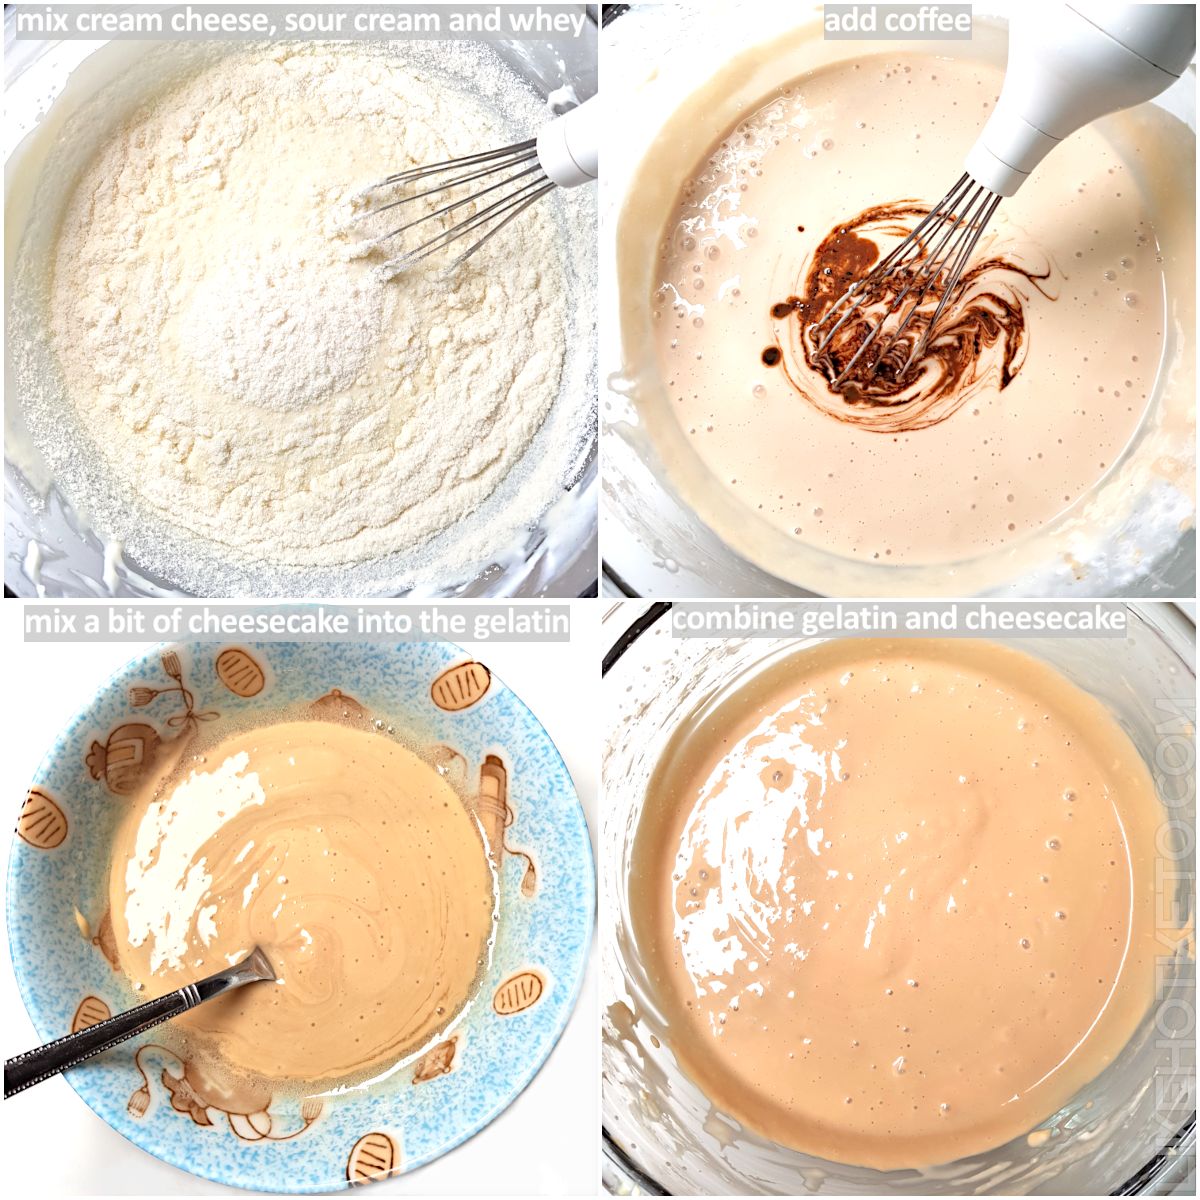 Picture collage of no-bake keto mocha cheesecake batter, showing the mixing of ingredients.